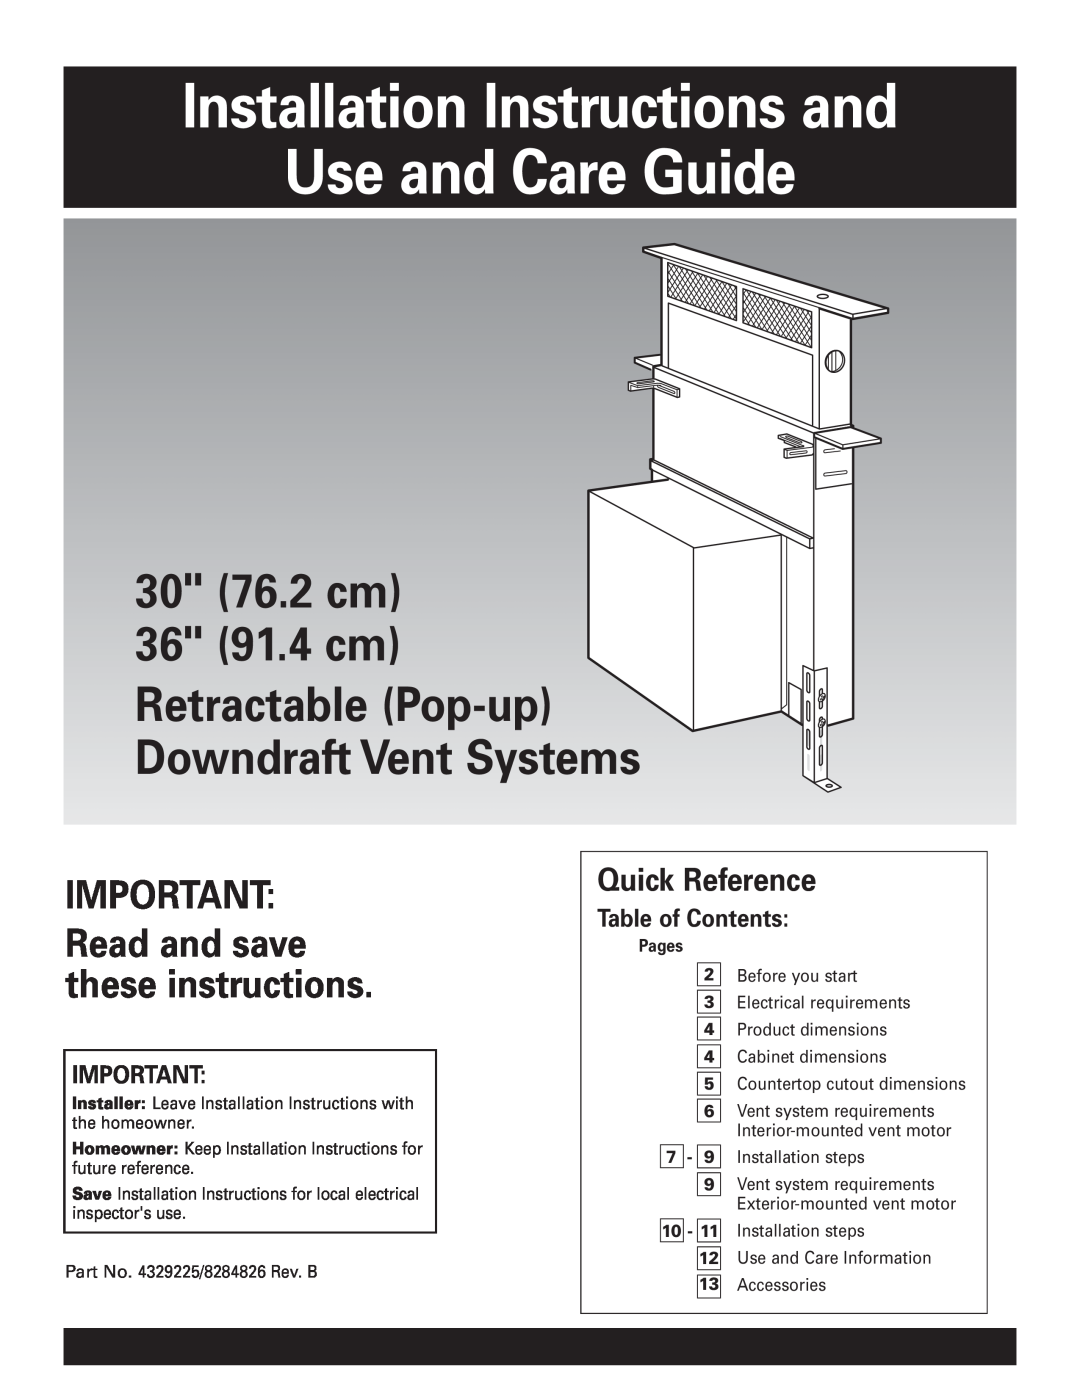 Whirlpool GZ7930XGS0 installation instructions Installation Instructions and Use and Care Guide, Downdraft Vent Systems 